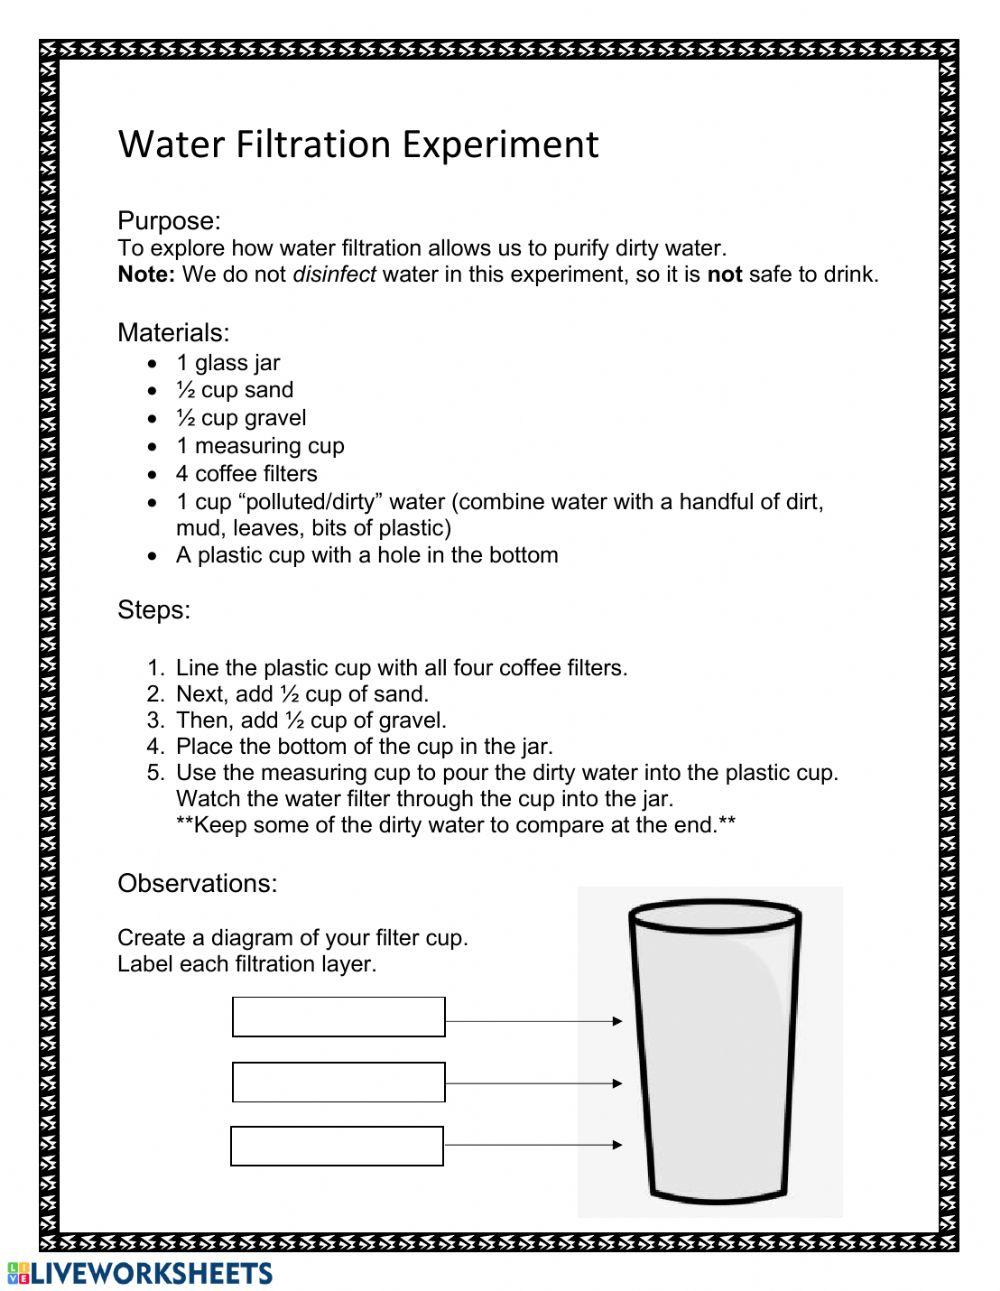 Water Filtration Experiment